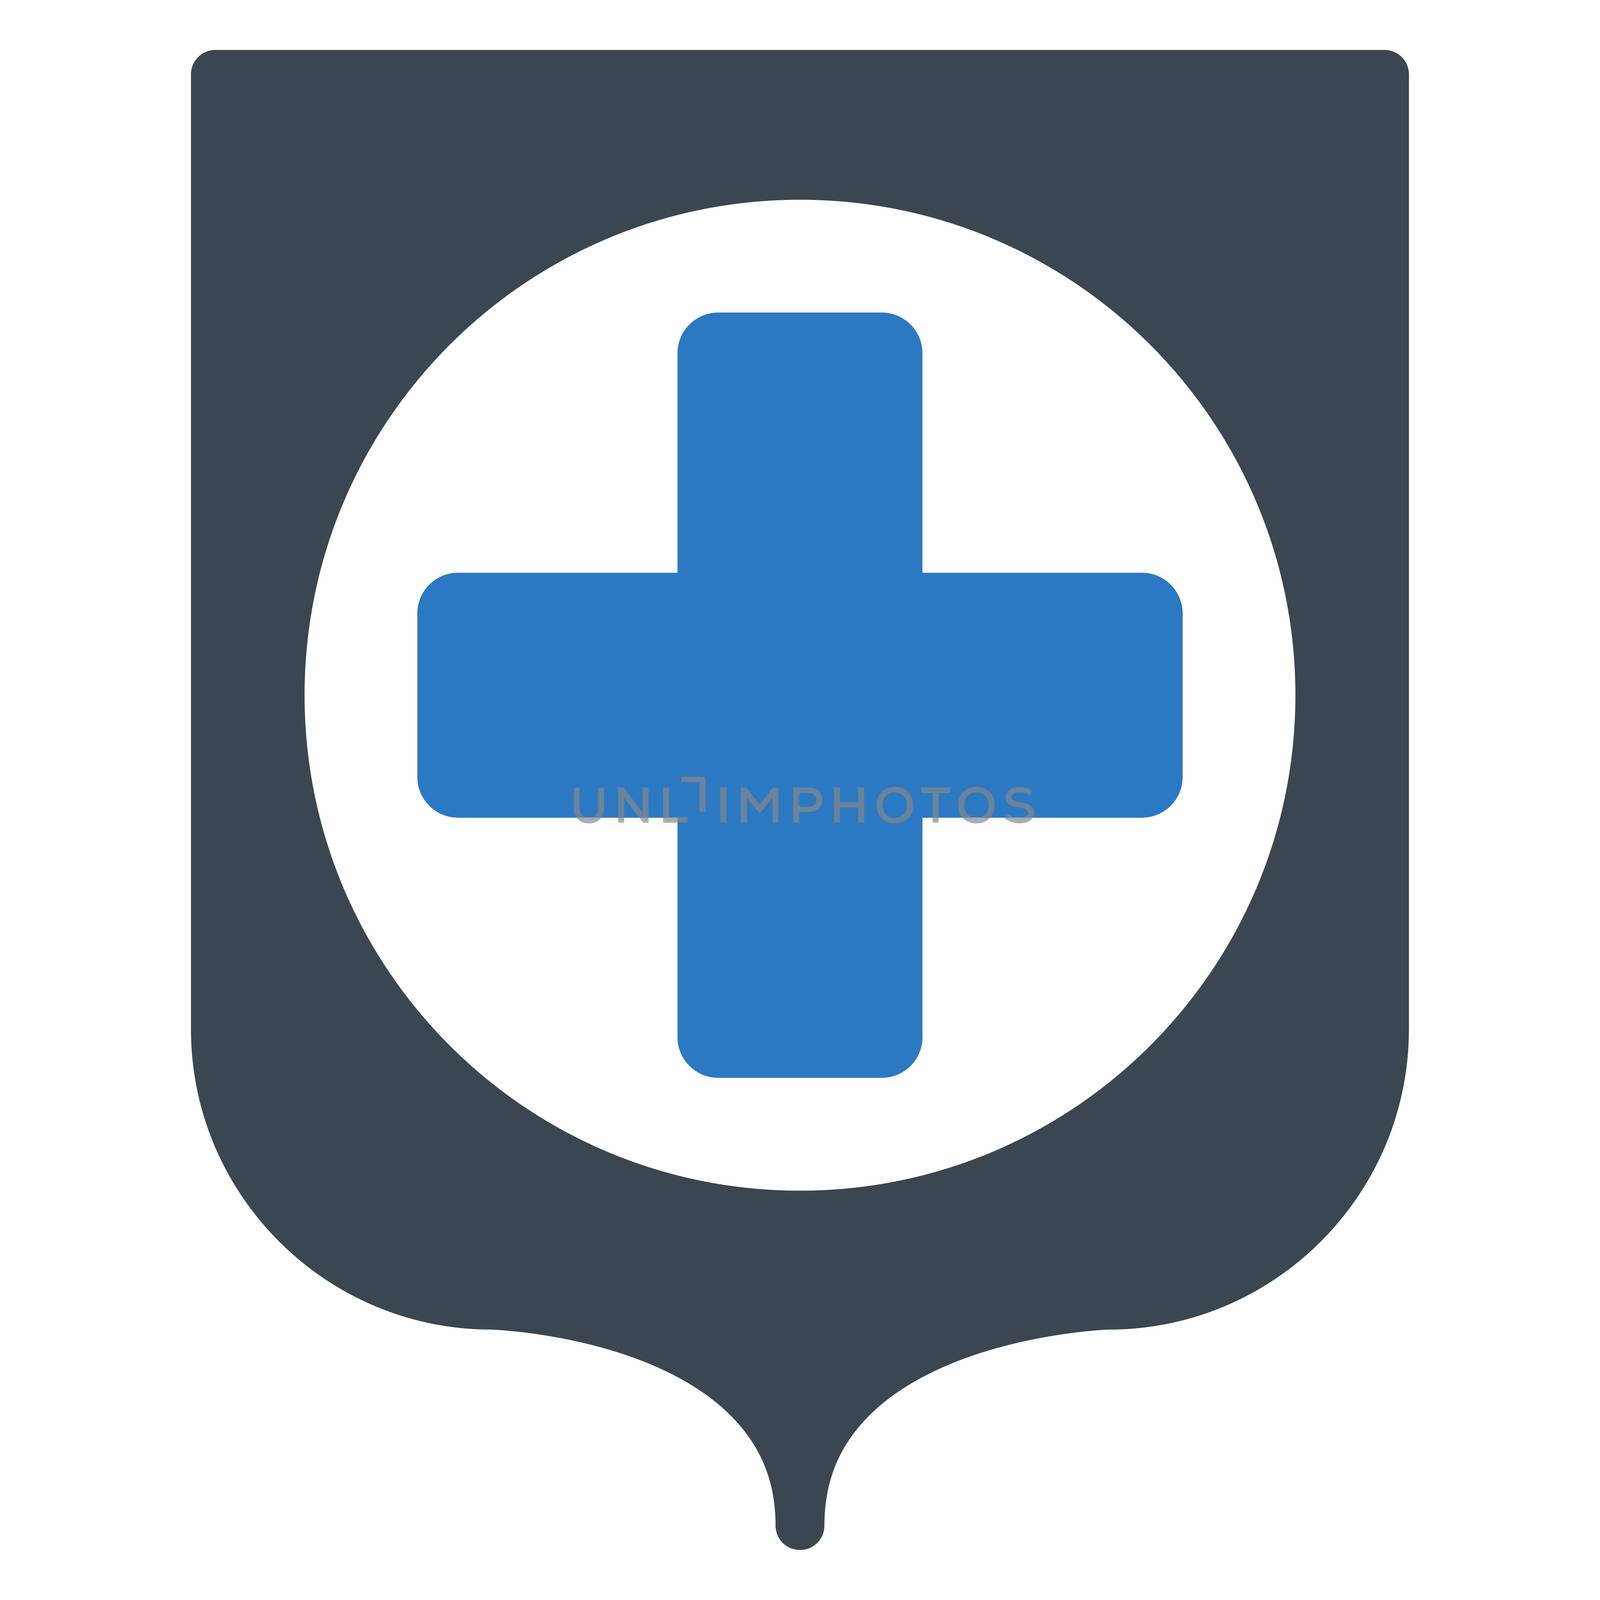 Medical Shield raster icon. Style is bicolor flat symbol, smooth blue colors, rounded angles, white background.